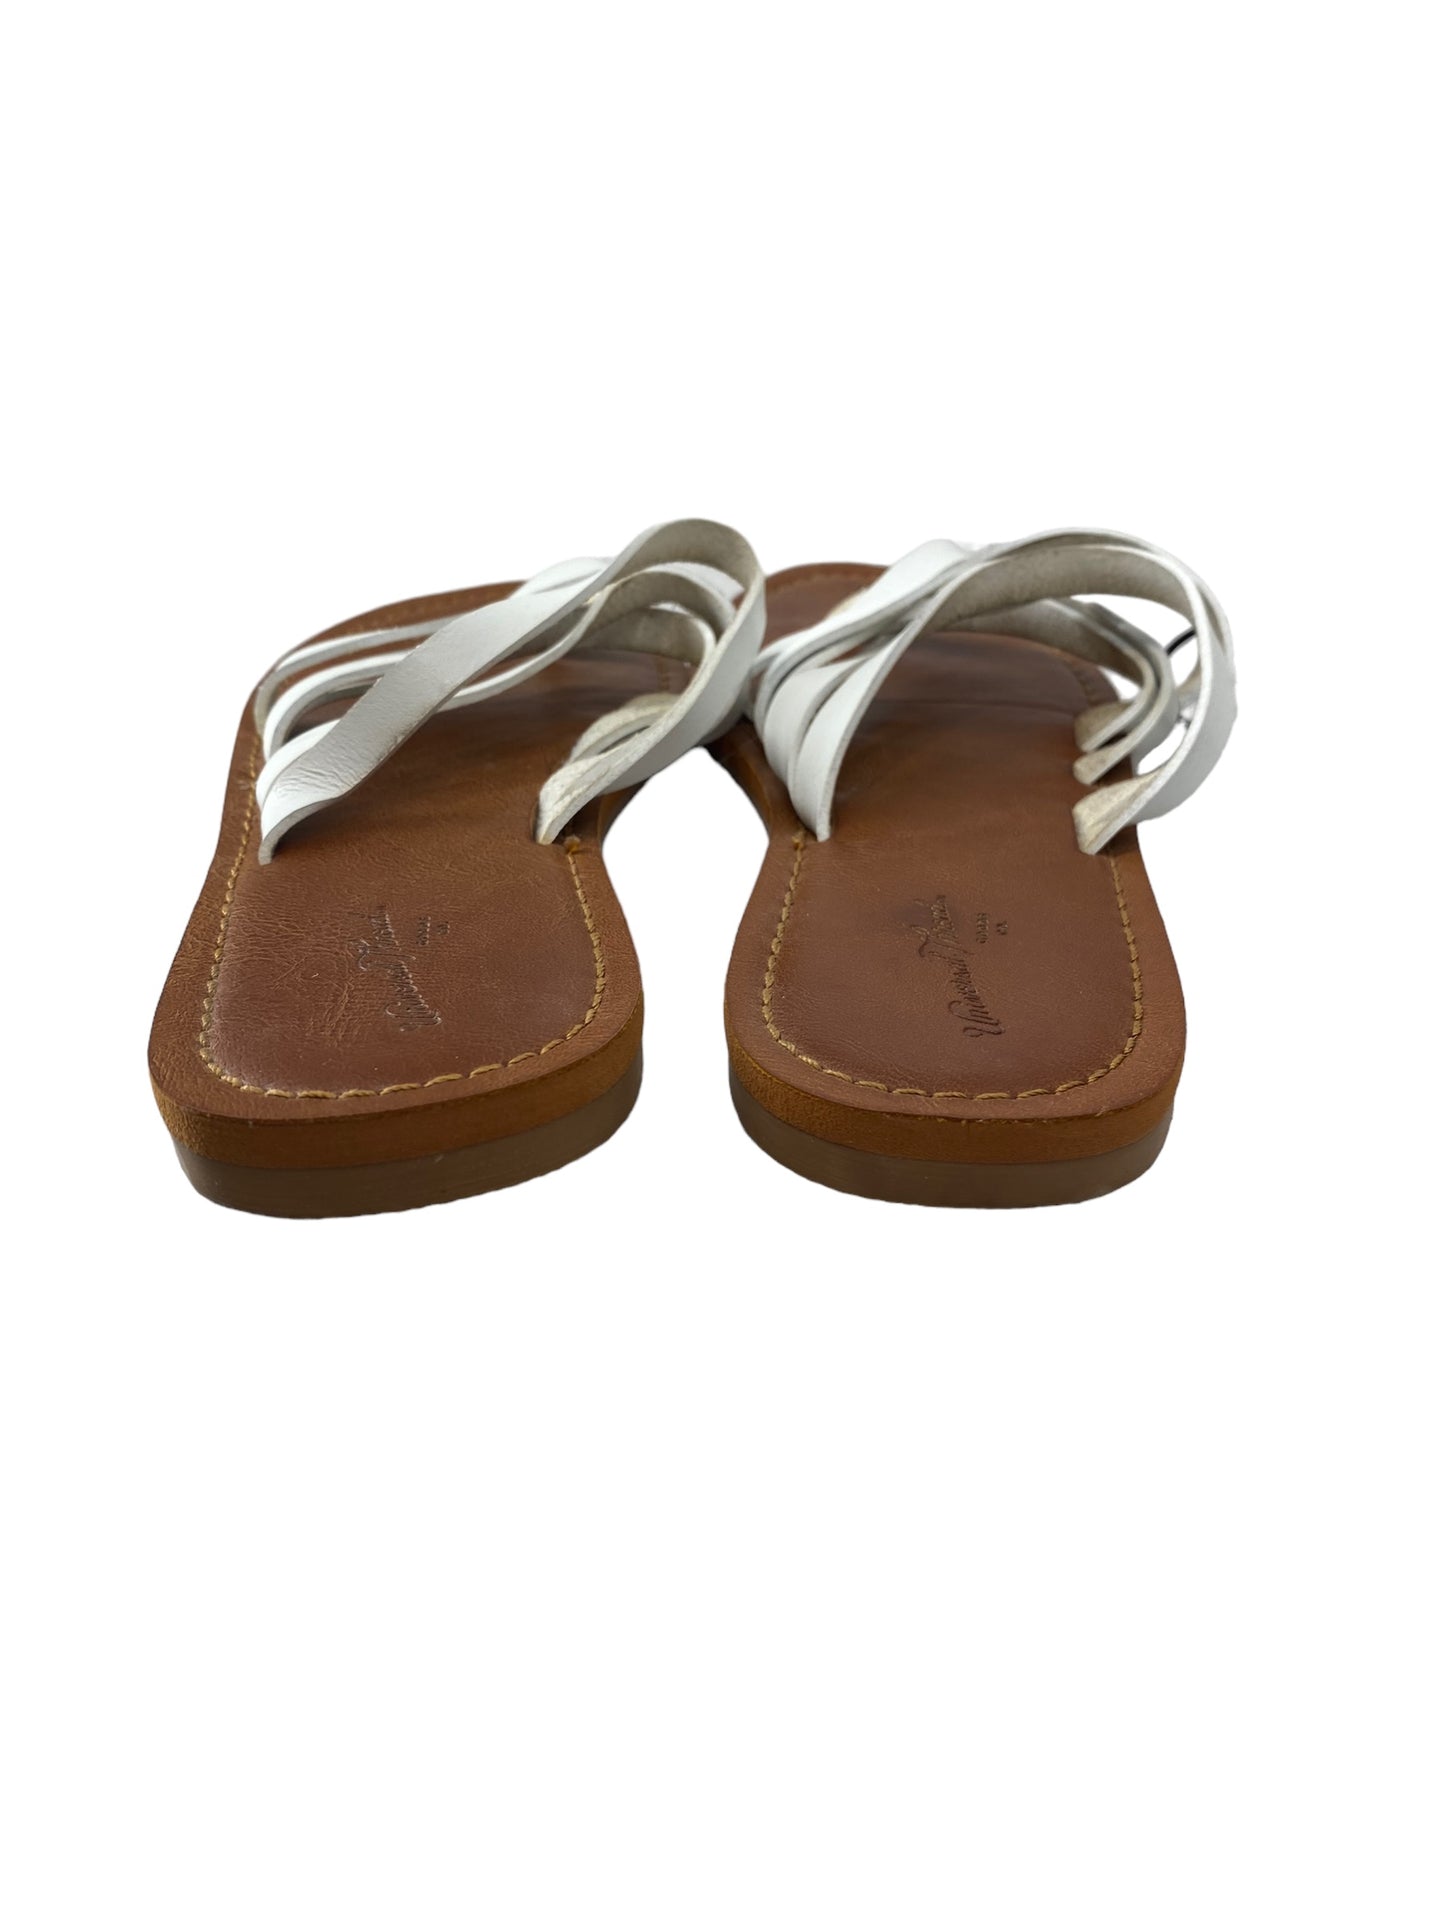 Sandals Flats By Universal Thread  Size: 7.5